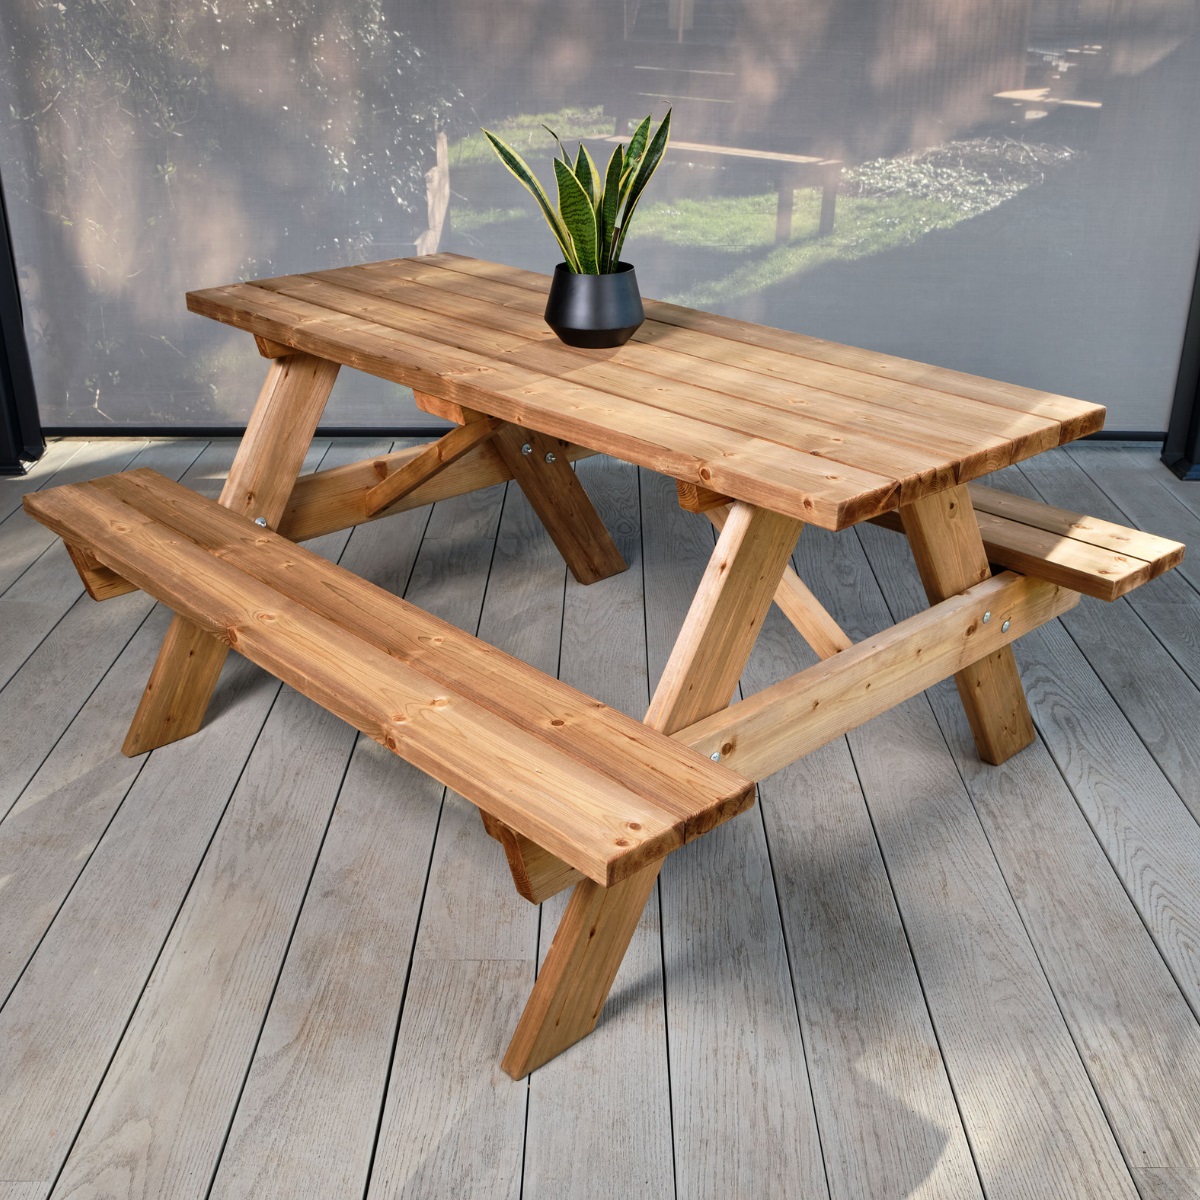 Standard 6 Seater A Frame Picnic Table Woodberry